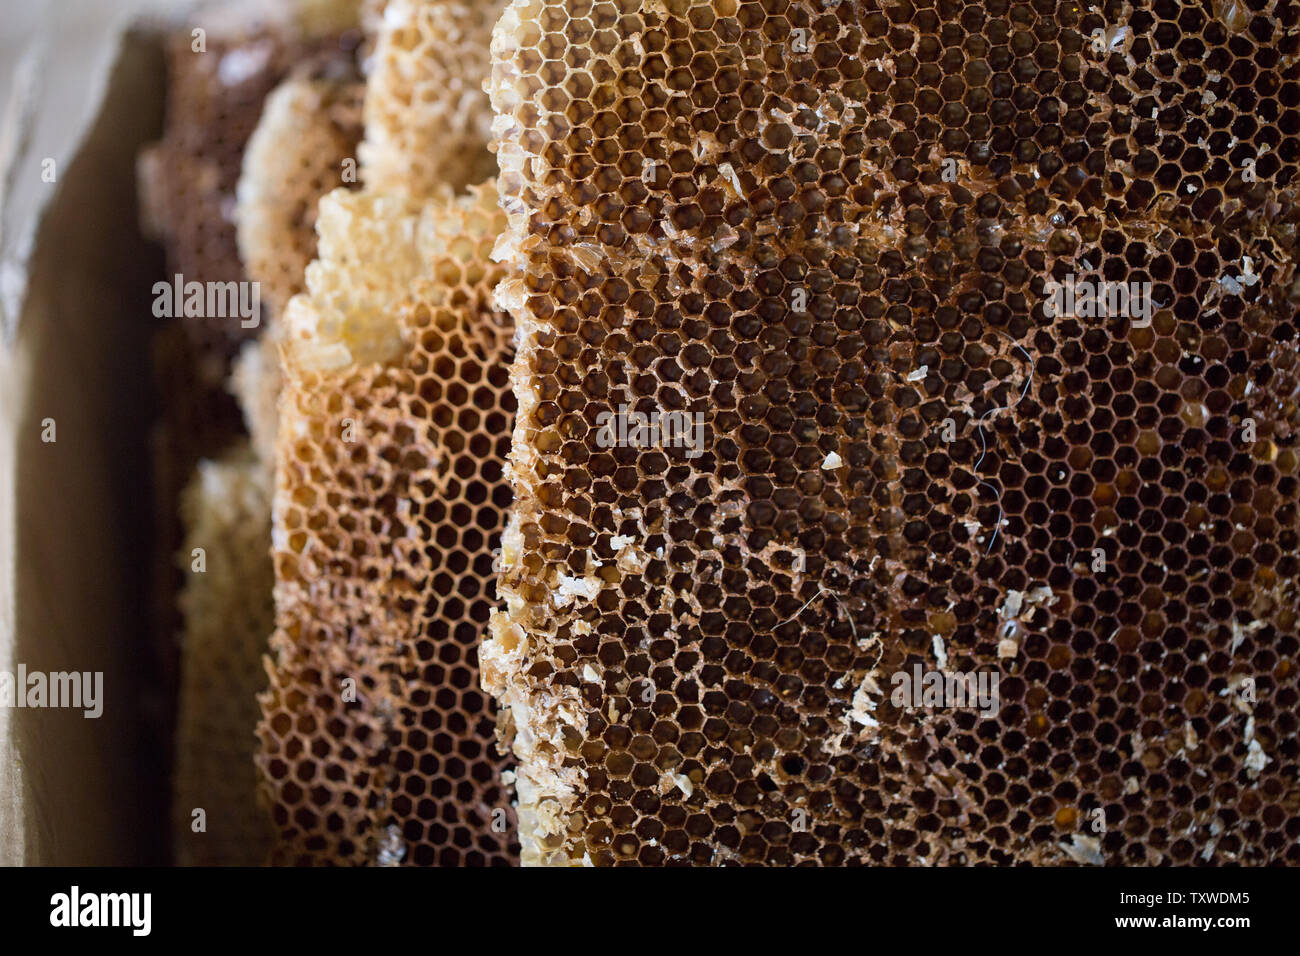 Natural bee Wax from honeycombs. Honeycombs after filtration. Honey harvesting and beekeeping Stock Photo